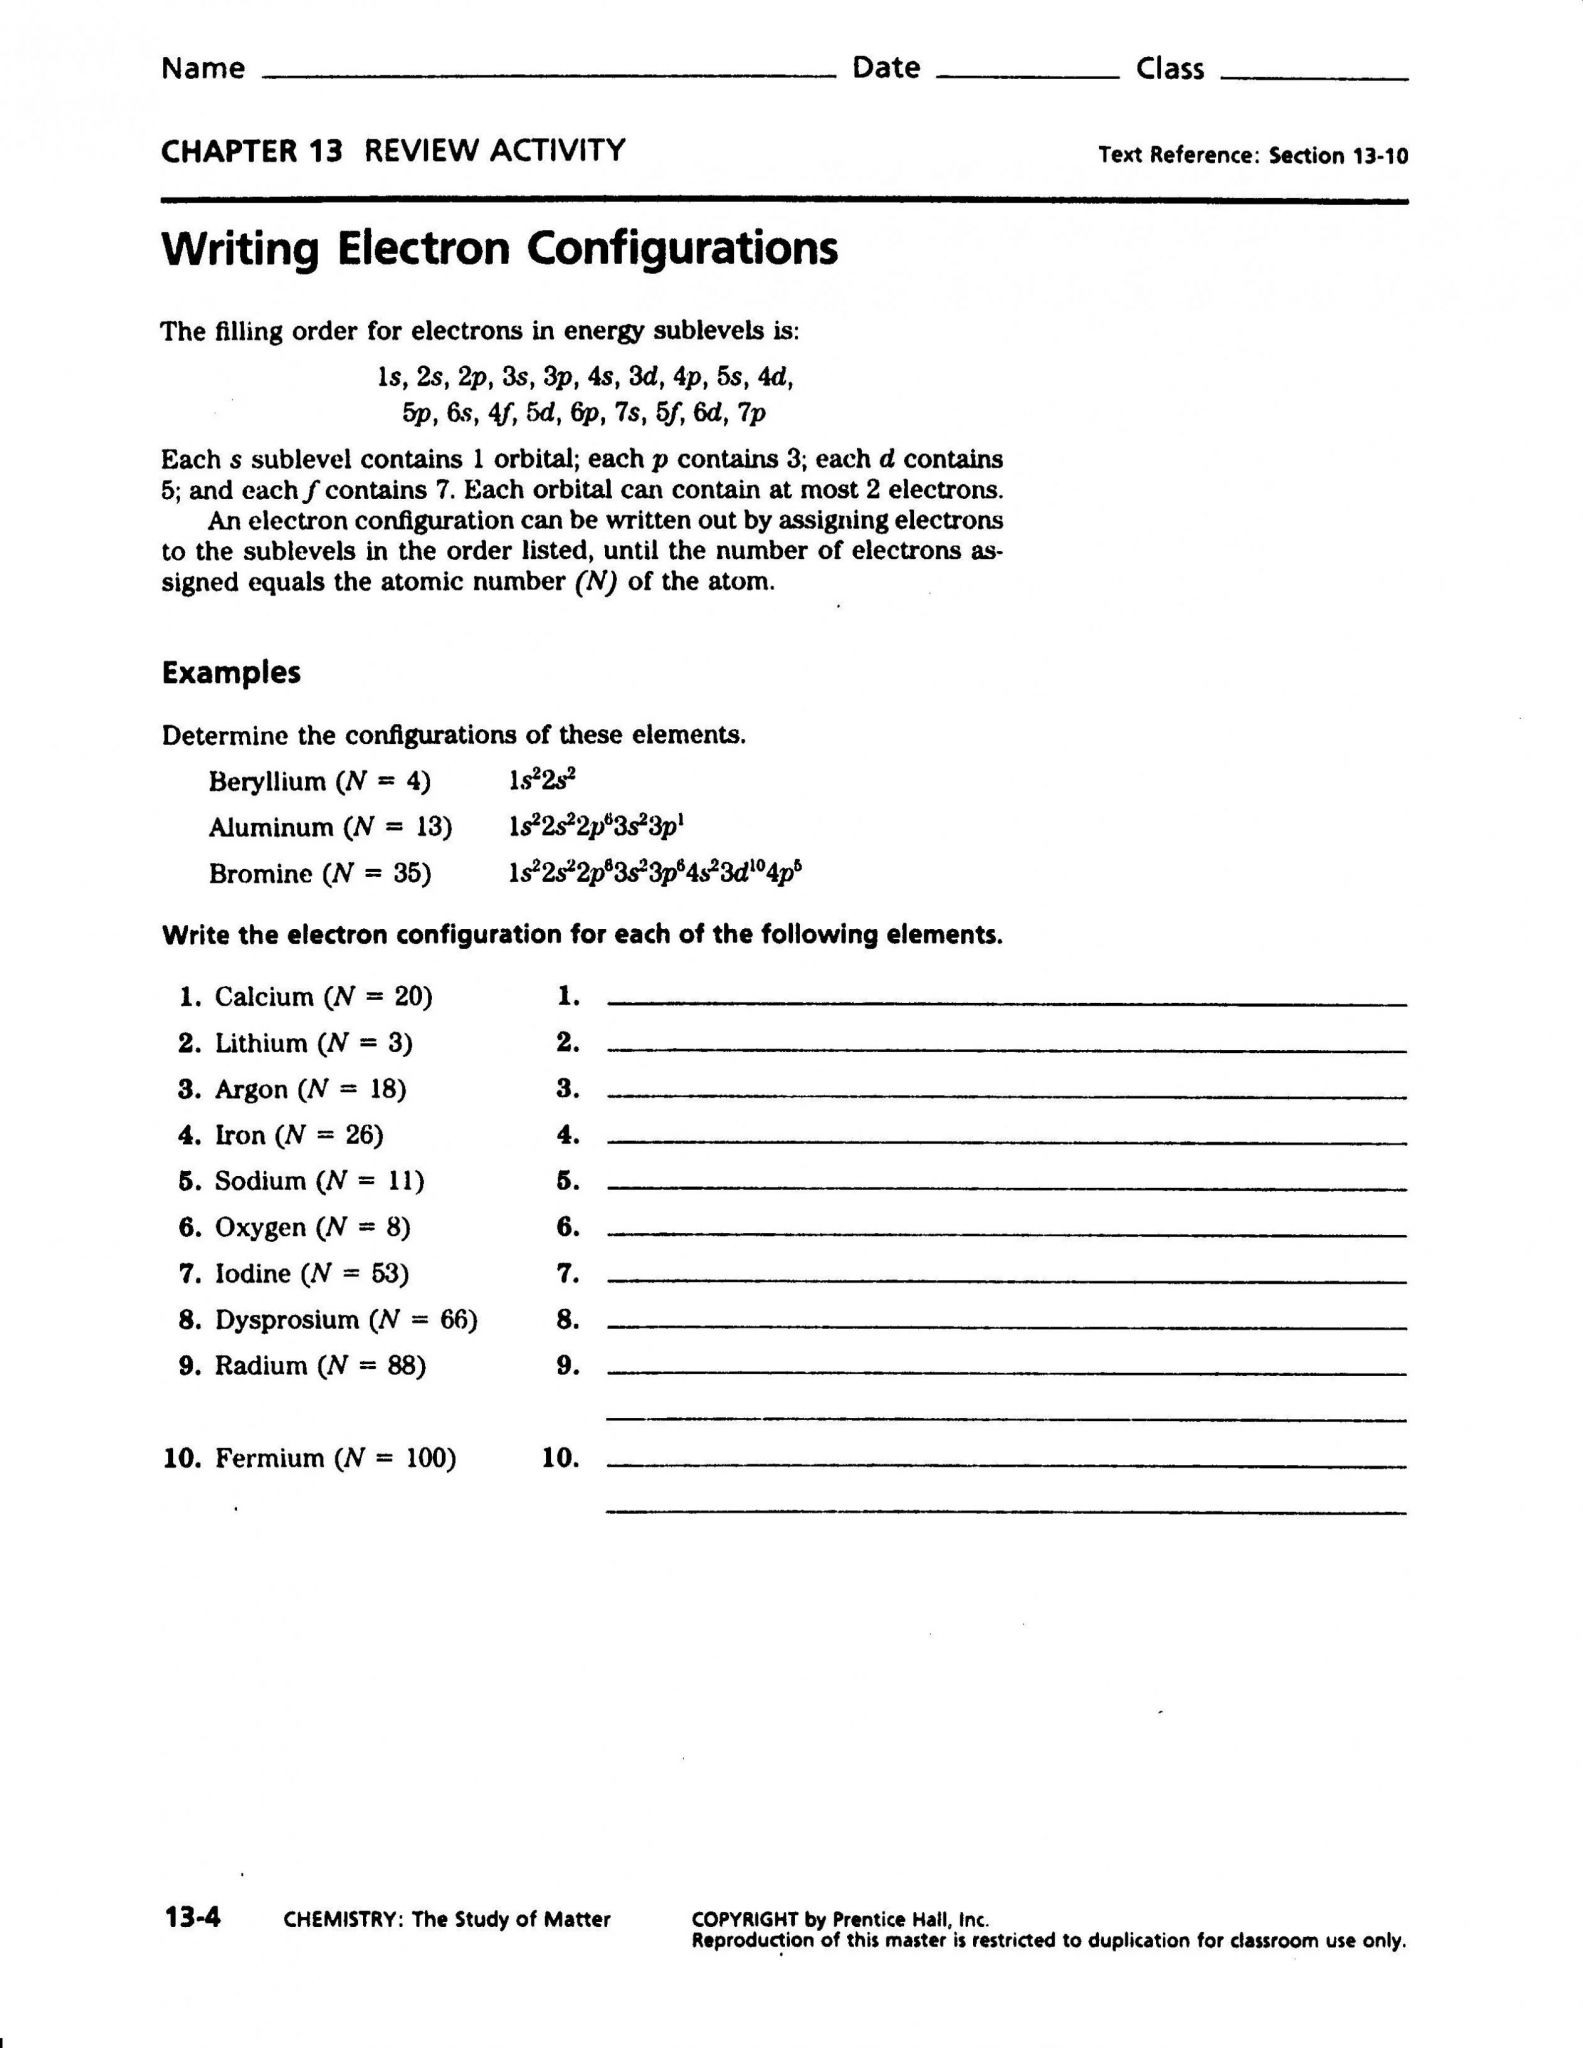 protons-neutrons-and-electrons-practice-worksheet-answer-key-db-excel